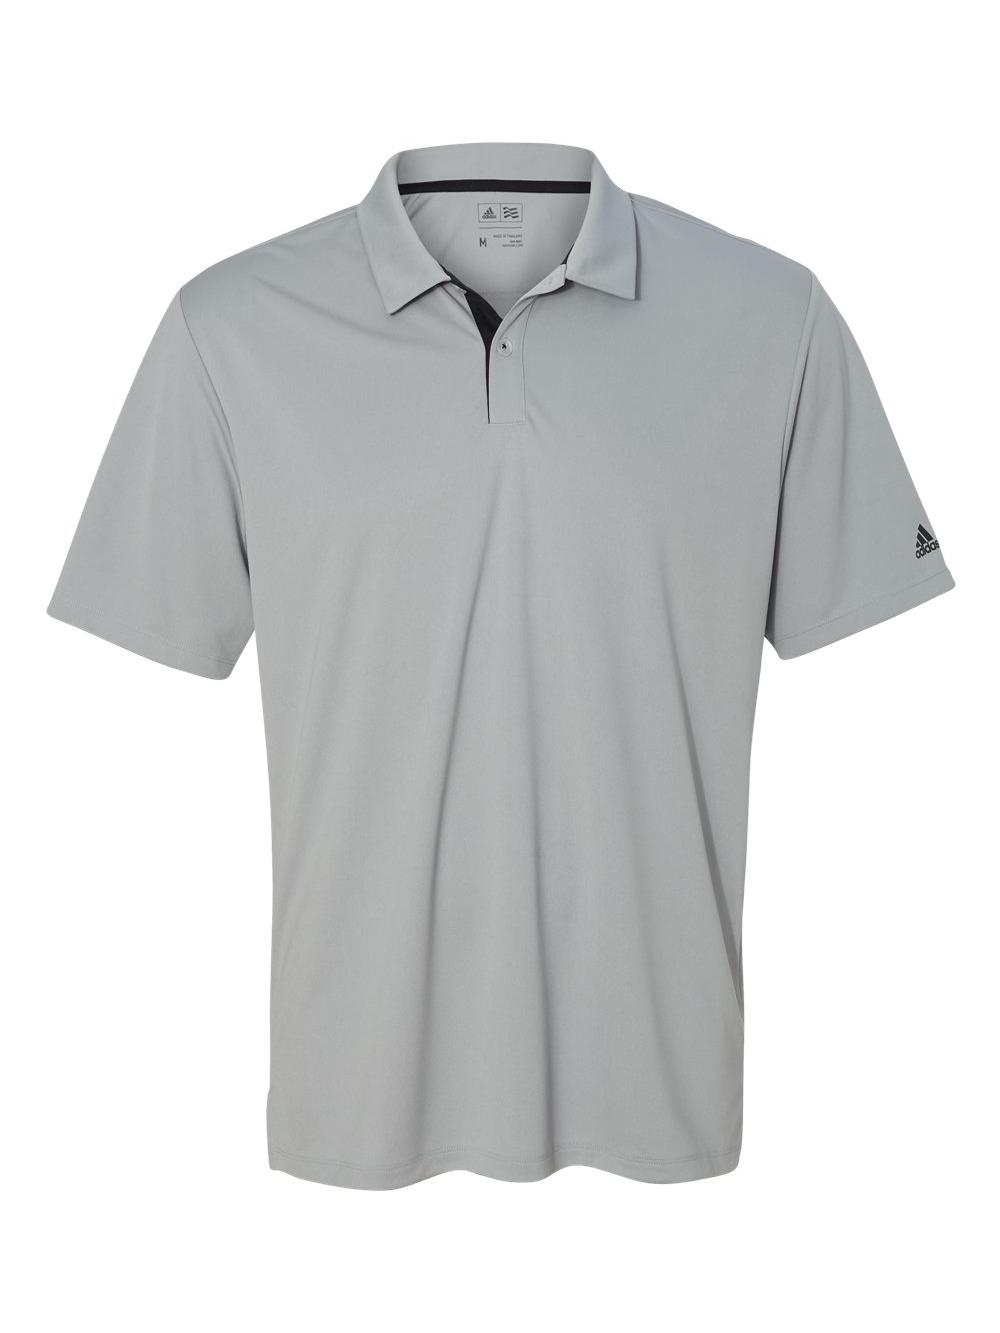 adidas Golf Men's climalite Texture Solid Polo - image 2 of 3